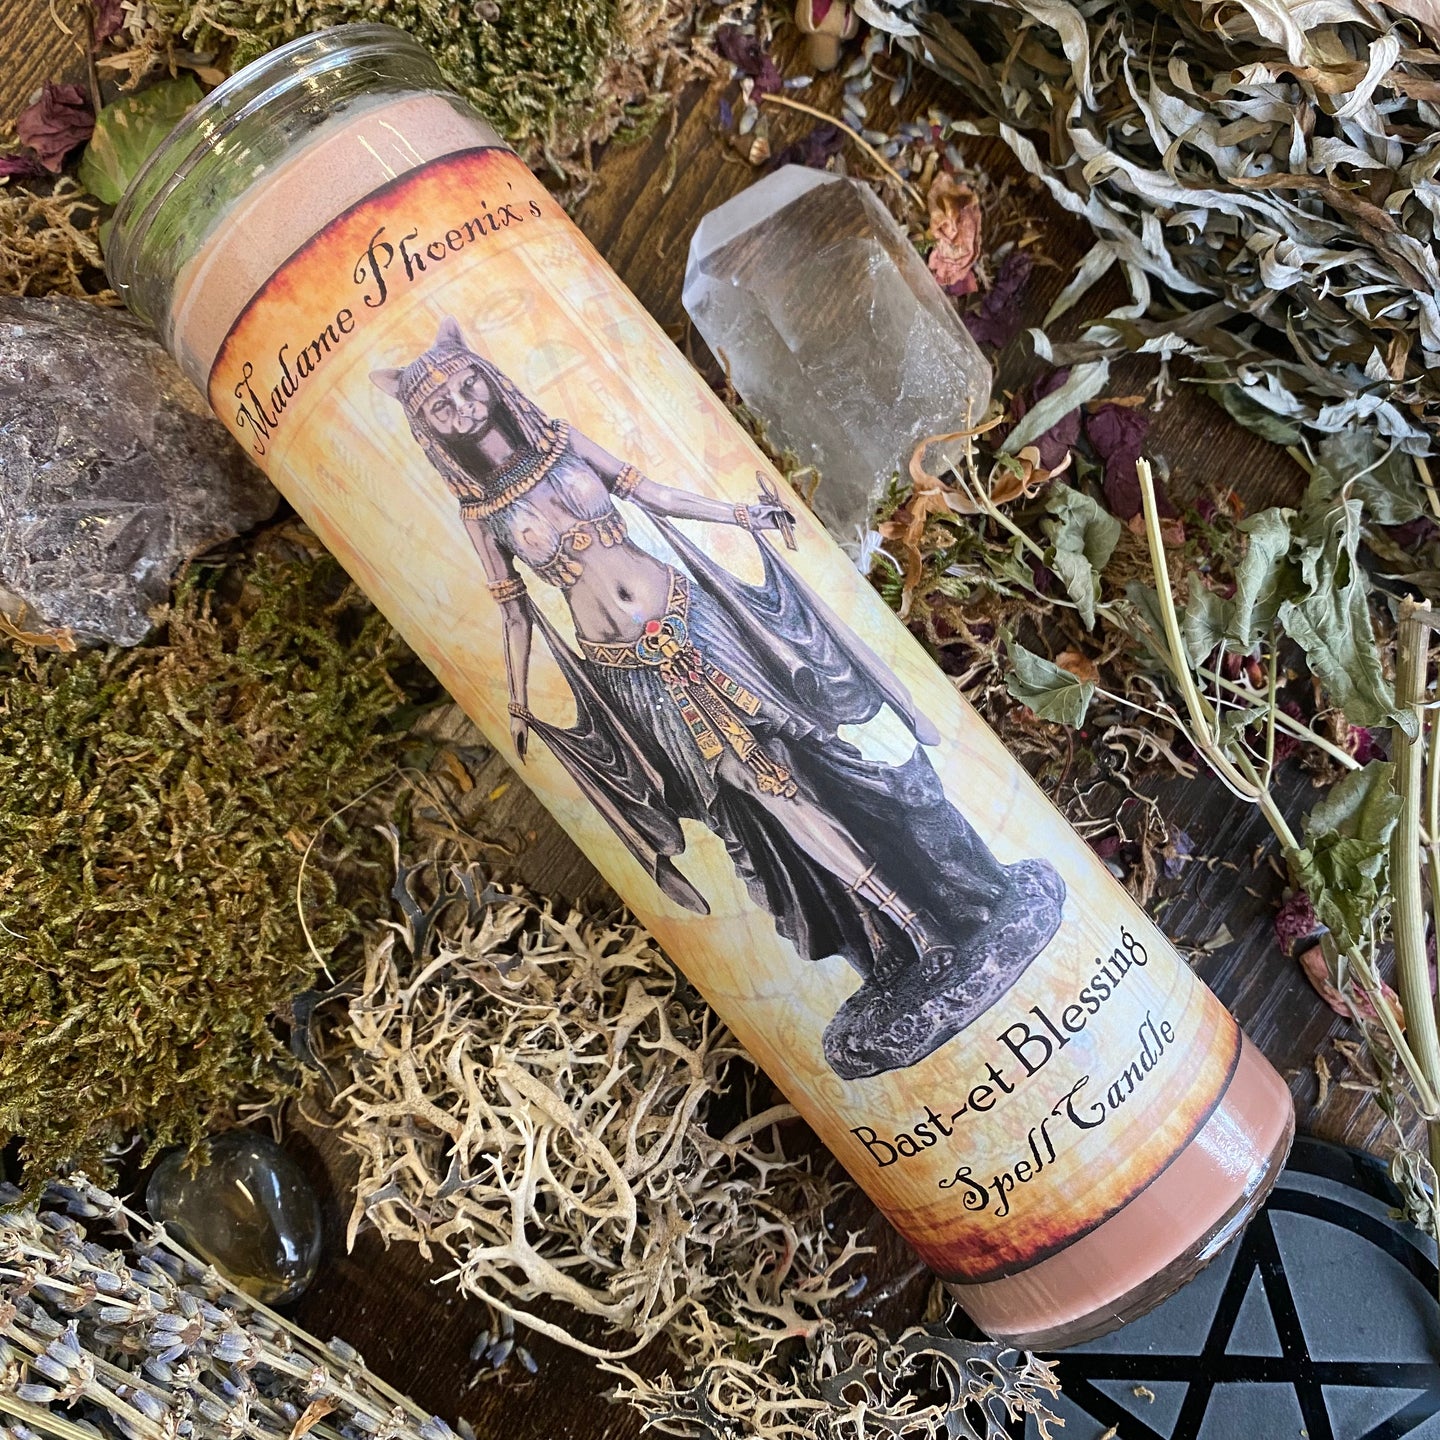 Bast Goddess 7 day Blessing Candle